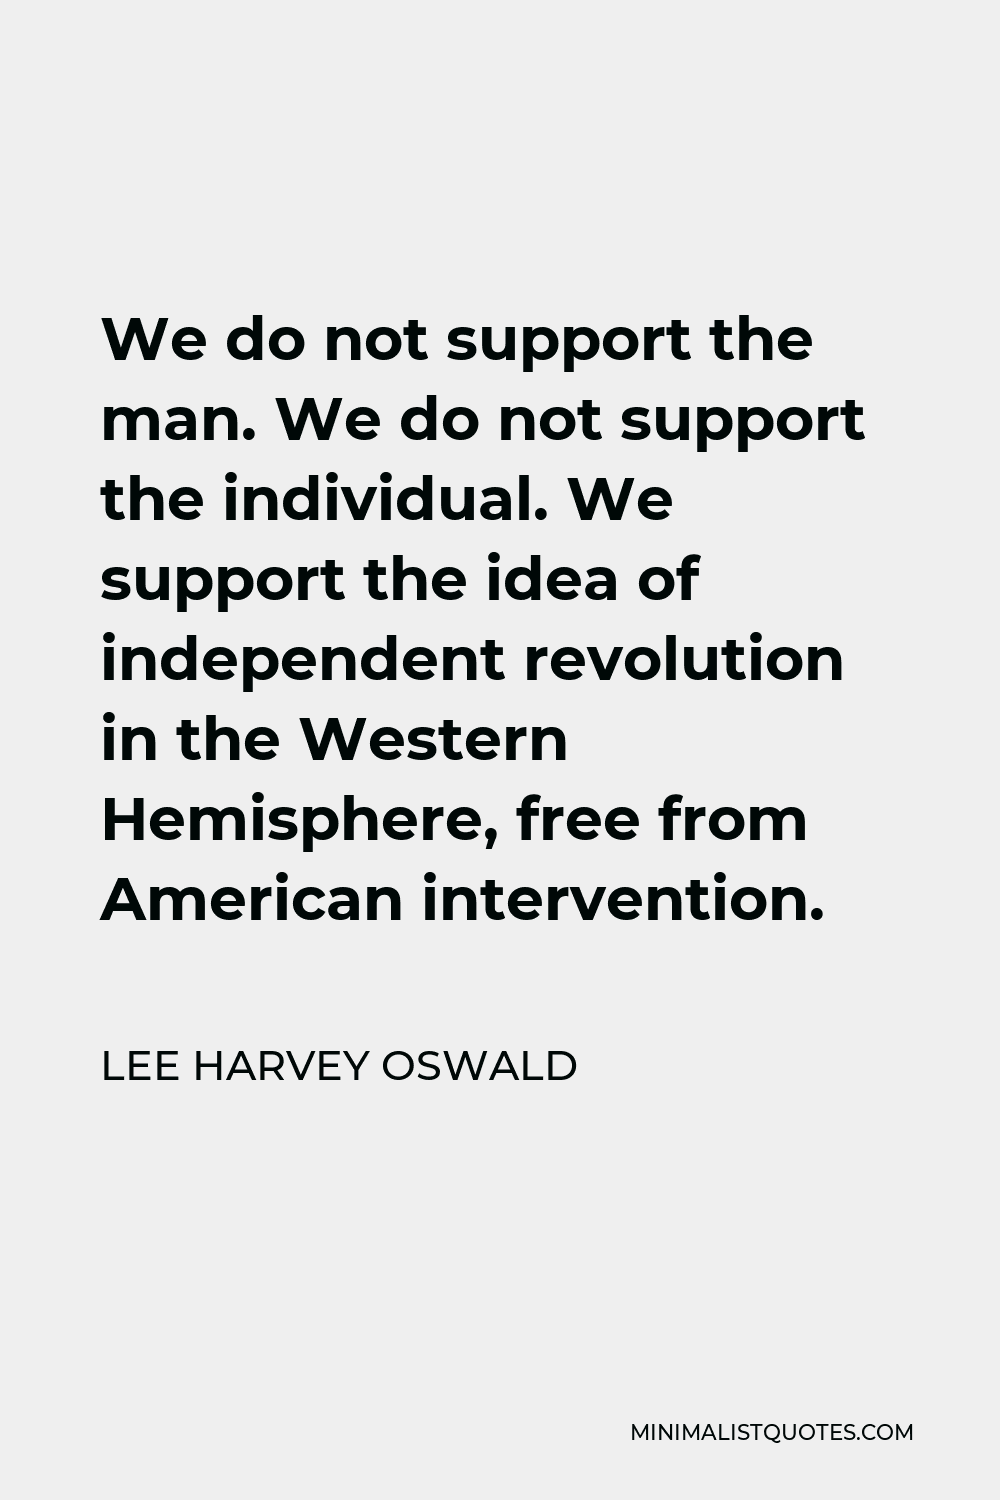 Lee Harvey Oswald Quote - We do not support the man. We do not support the individual. We support the idea of independent revolution in the Western Hemisphere, free from American intervention.